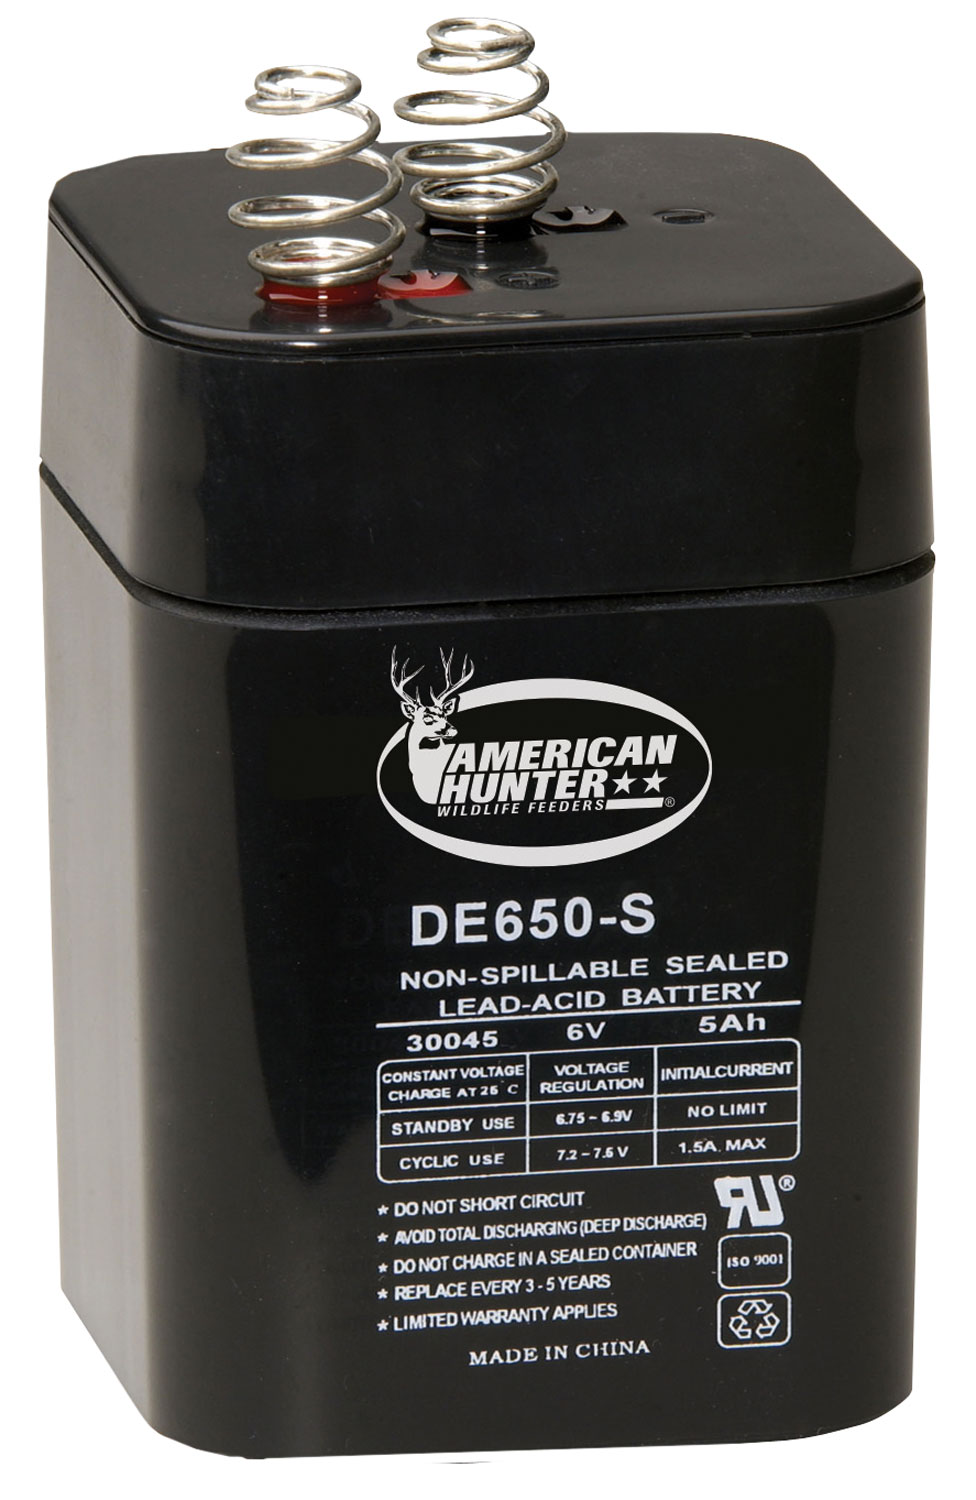 AMERICAN HUNTER BATTERY RECHARGEABLE 6V 5AMP SPRINGTOP